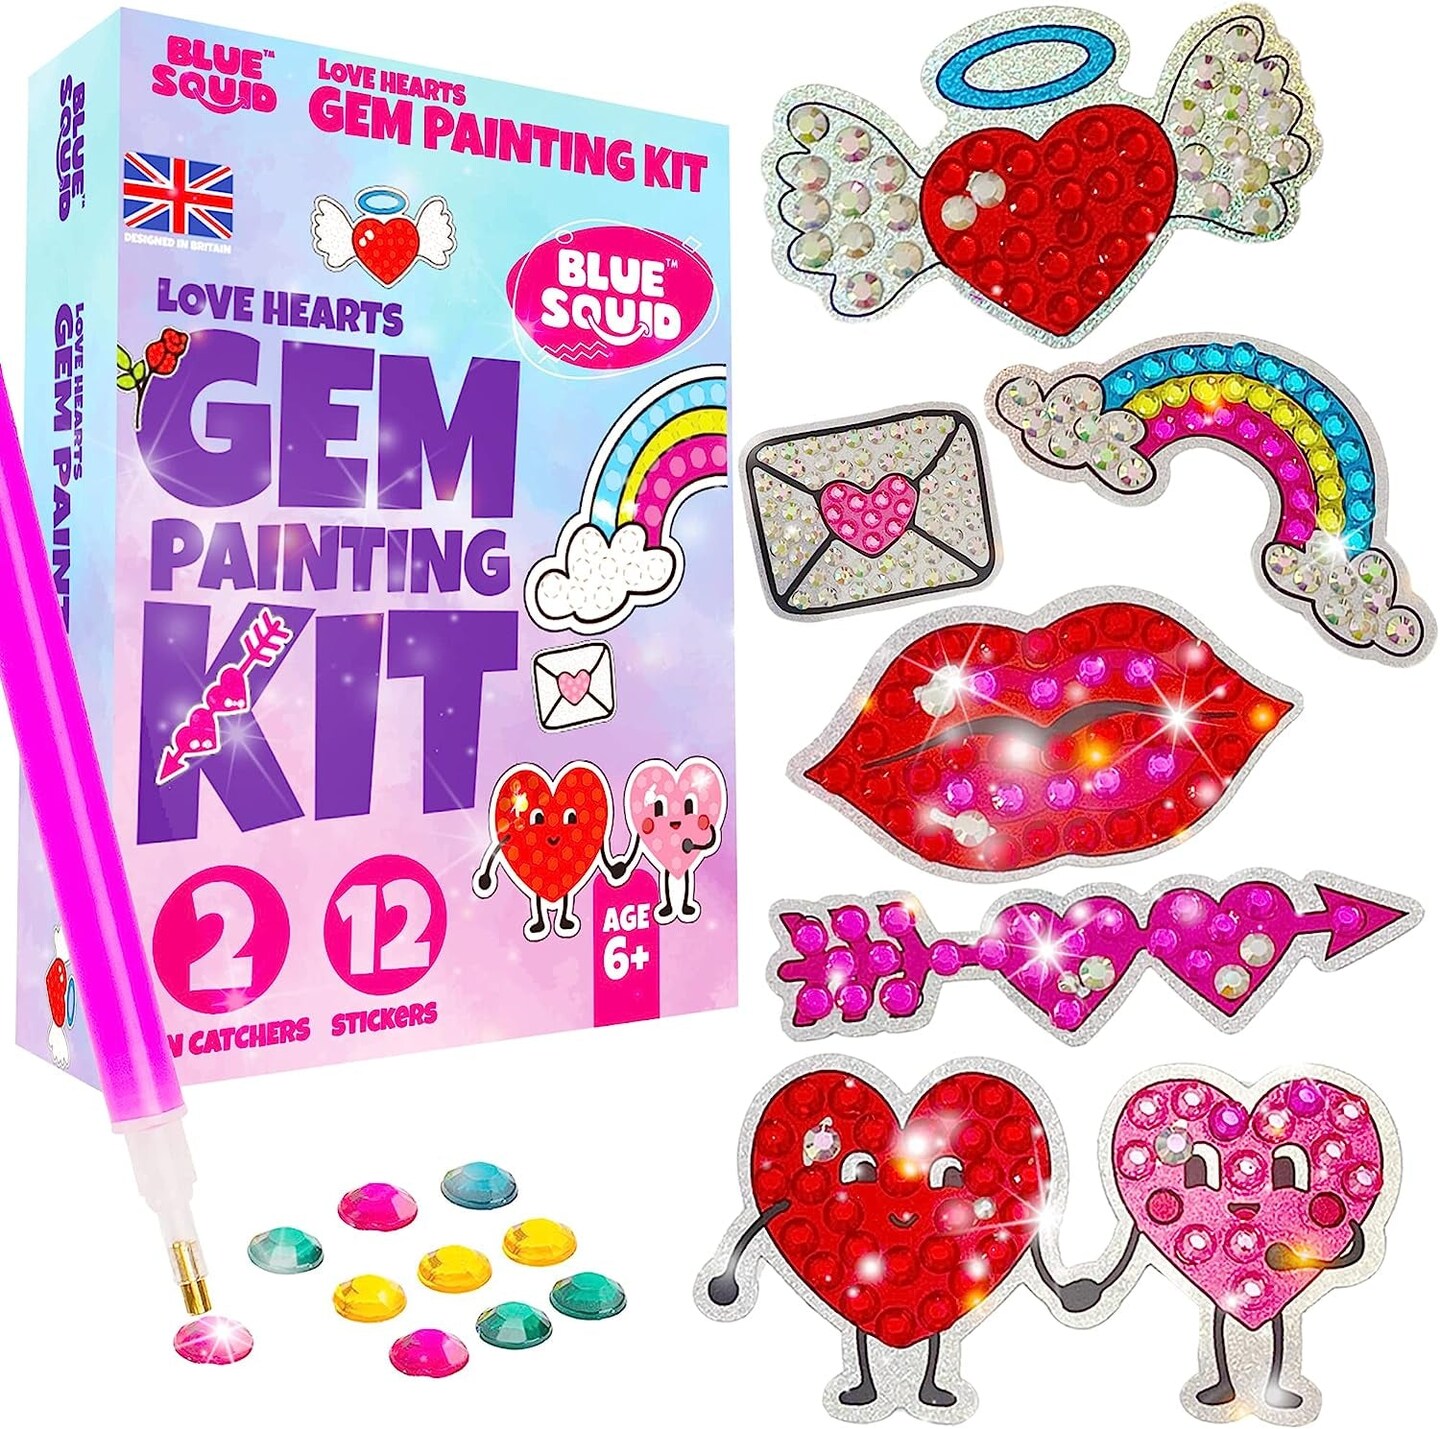 Kids 5D Diamond Painting Art Kits: Art and Crafts for Boys Girls